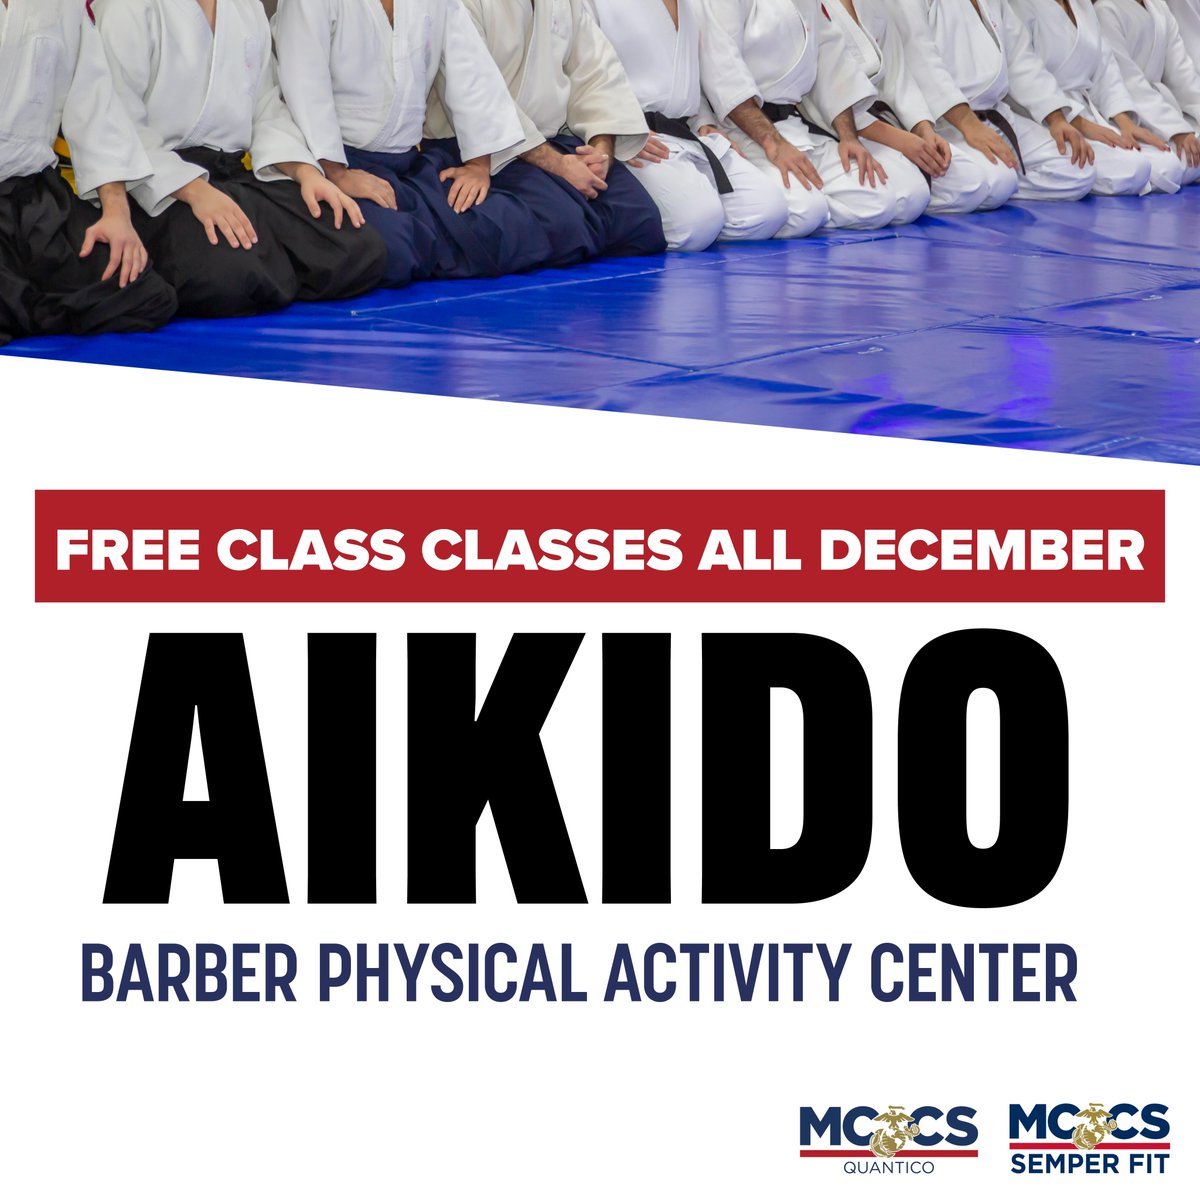 In the month of December Aikido classes are being offered for FREE. Classes take place Monday & Wednesdays, 3:00-4:30 PM, and on Saturdays 9-10 AM. For more info, call 703.432.0590 or 703.784.2339.